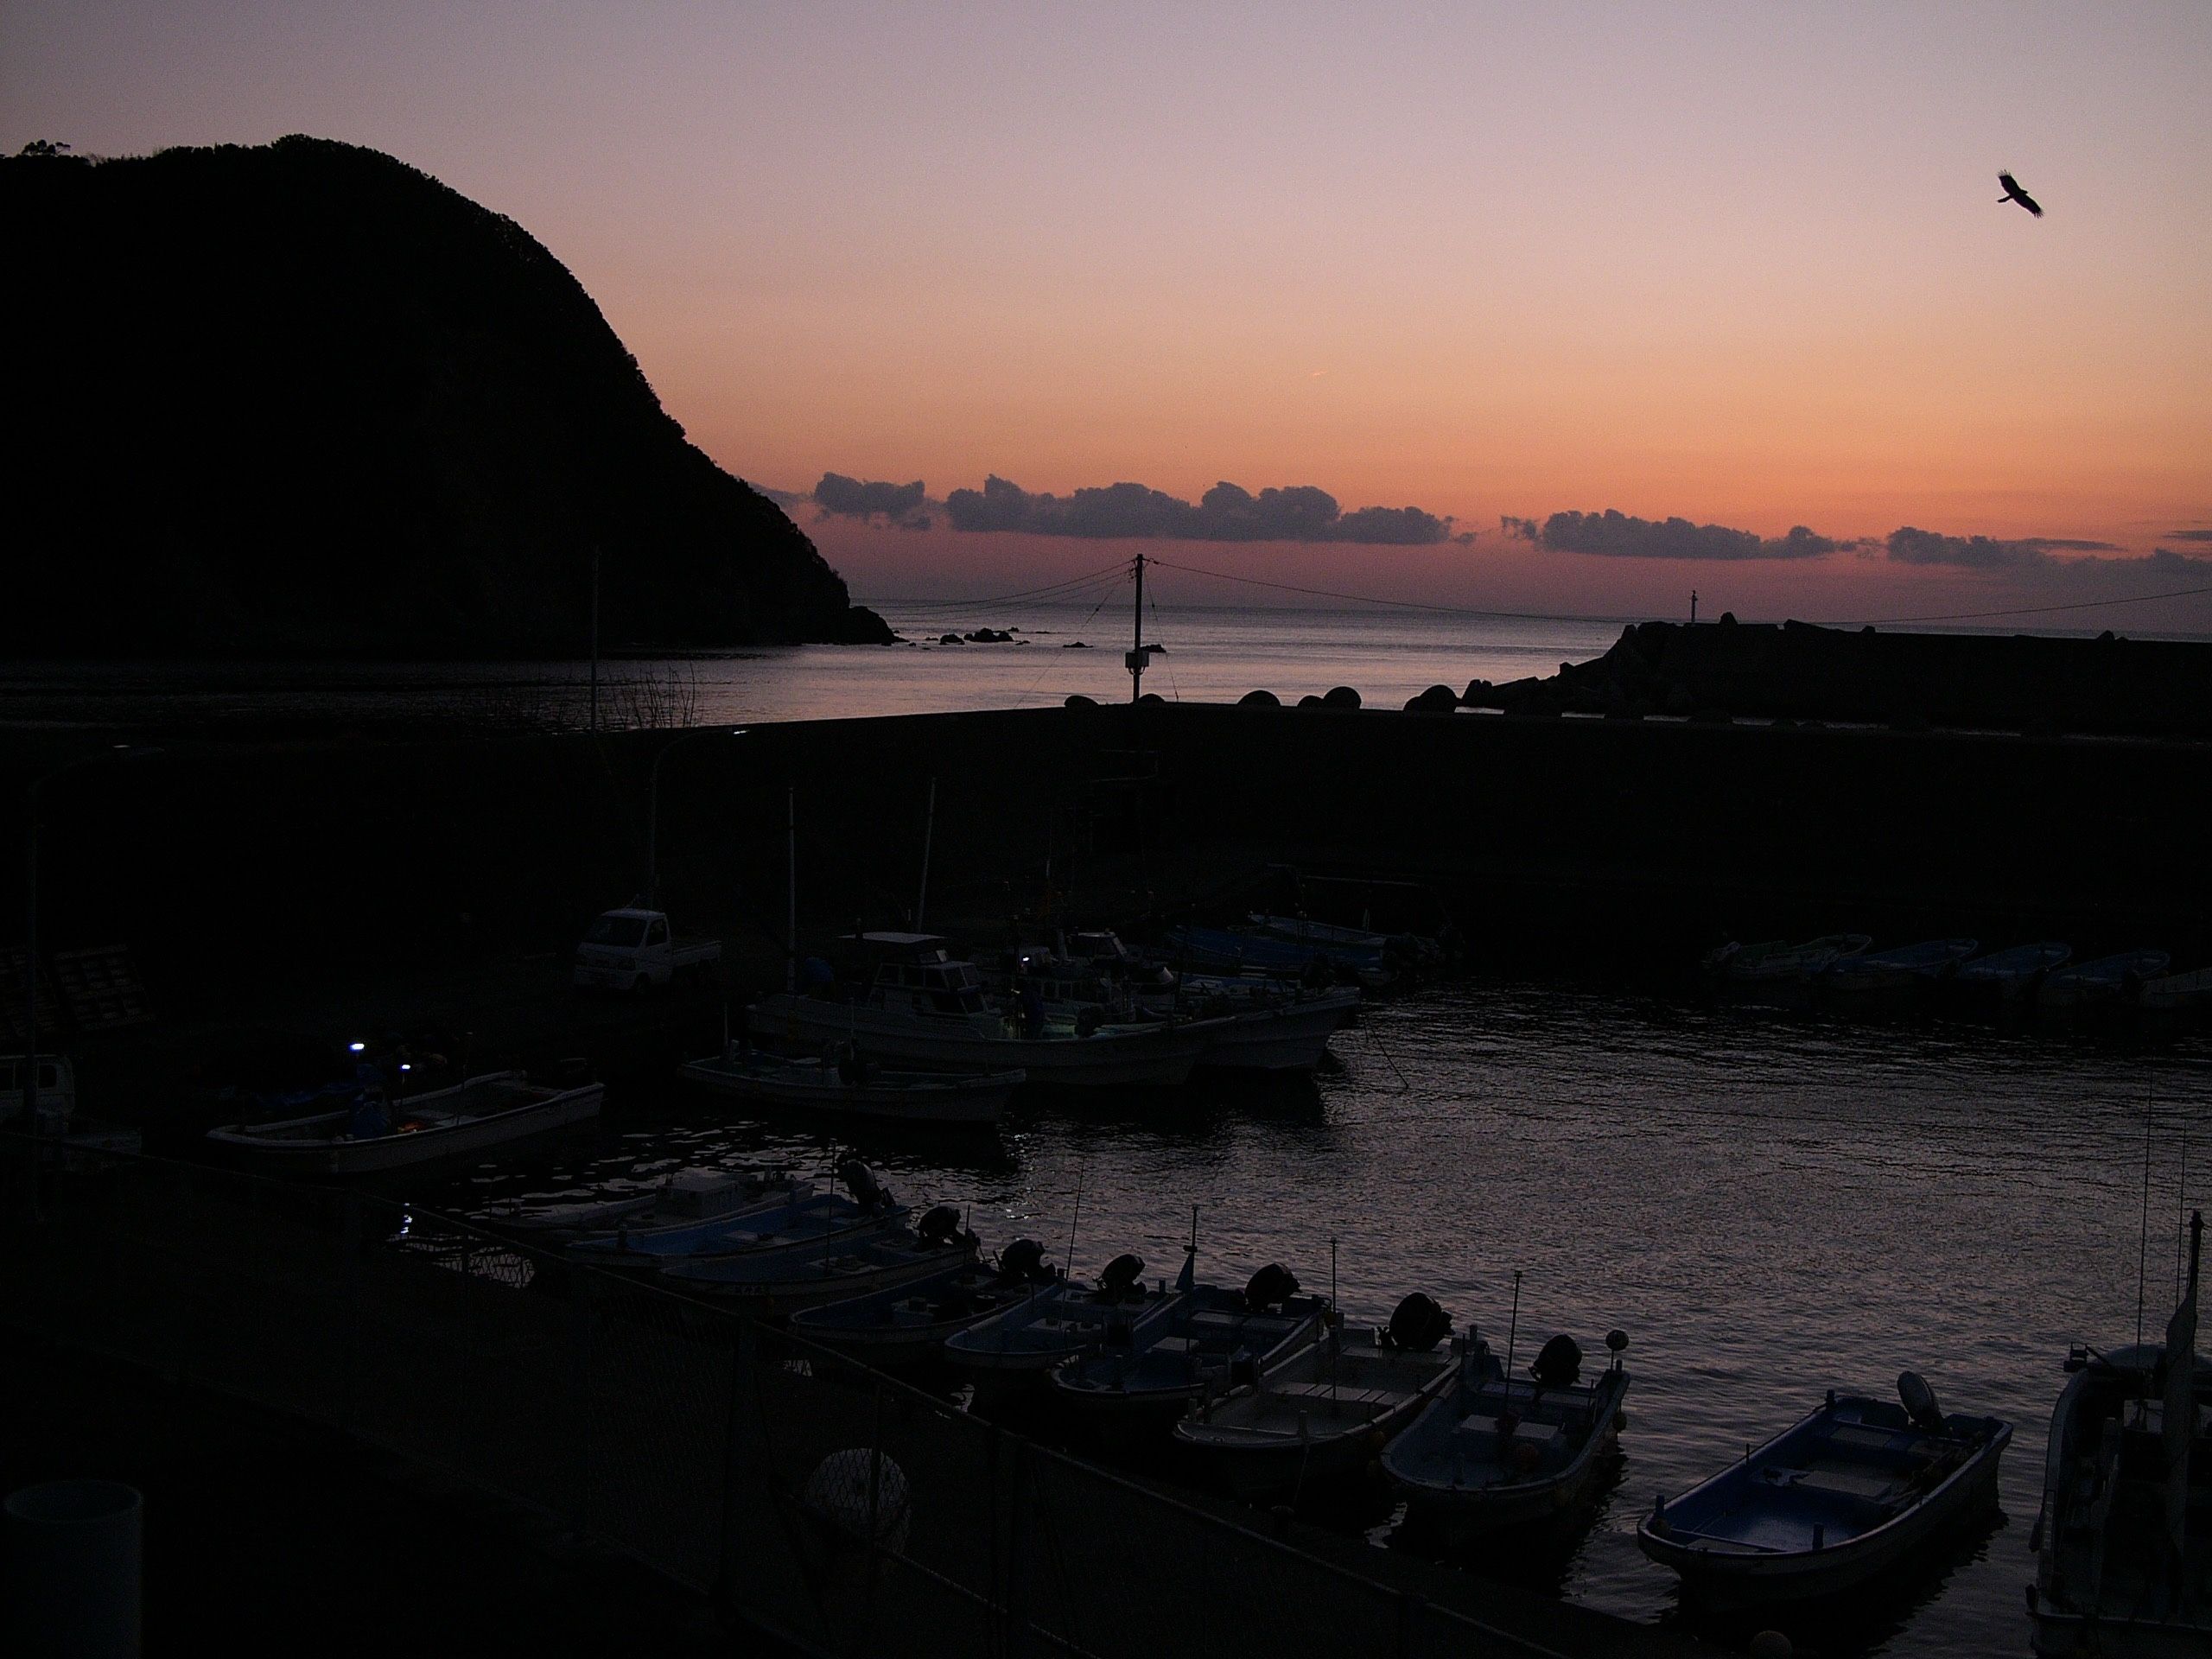 Dawn over a fishing harbor, with a large bird flying above the boats.